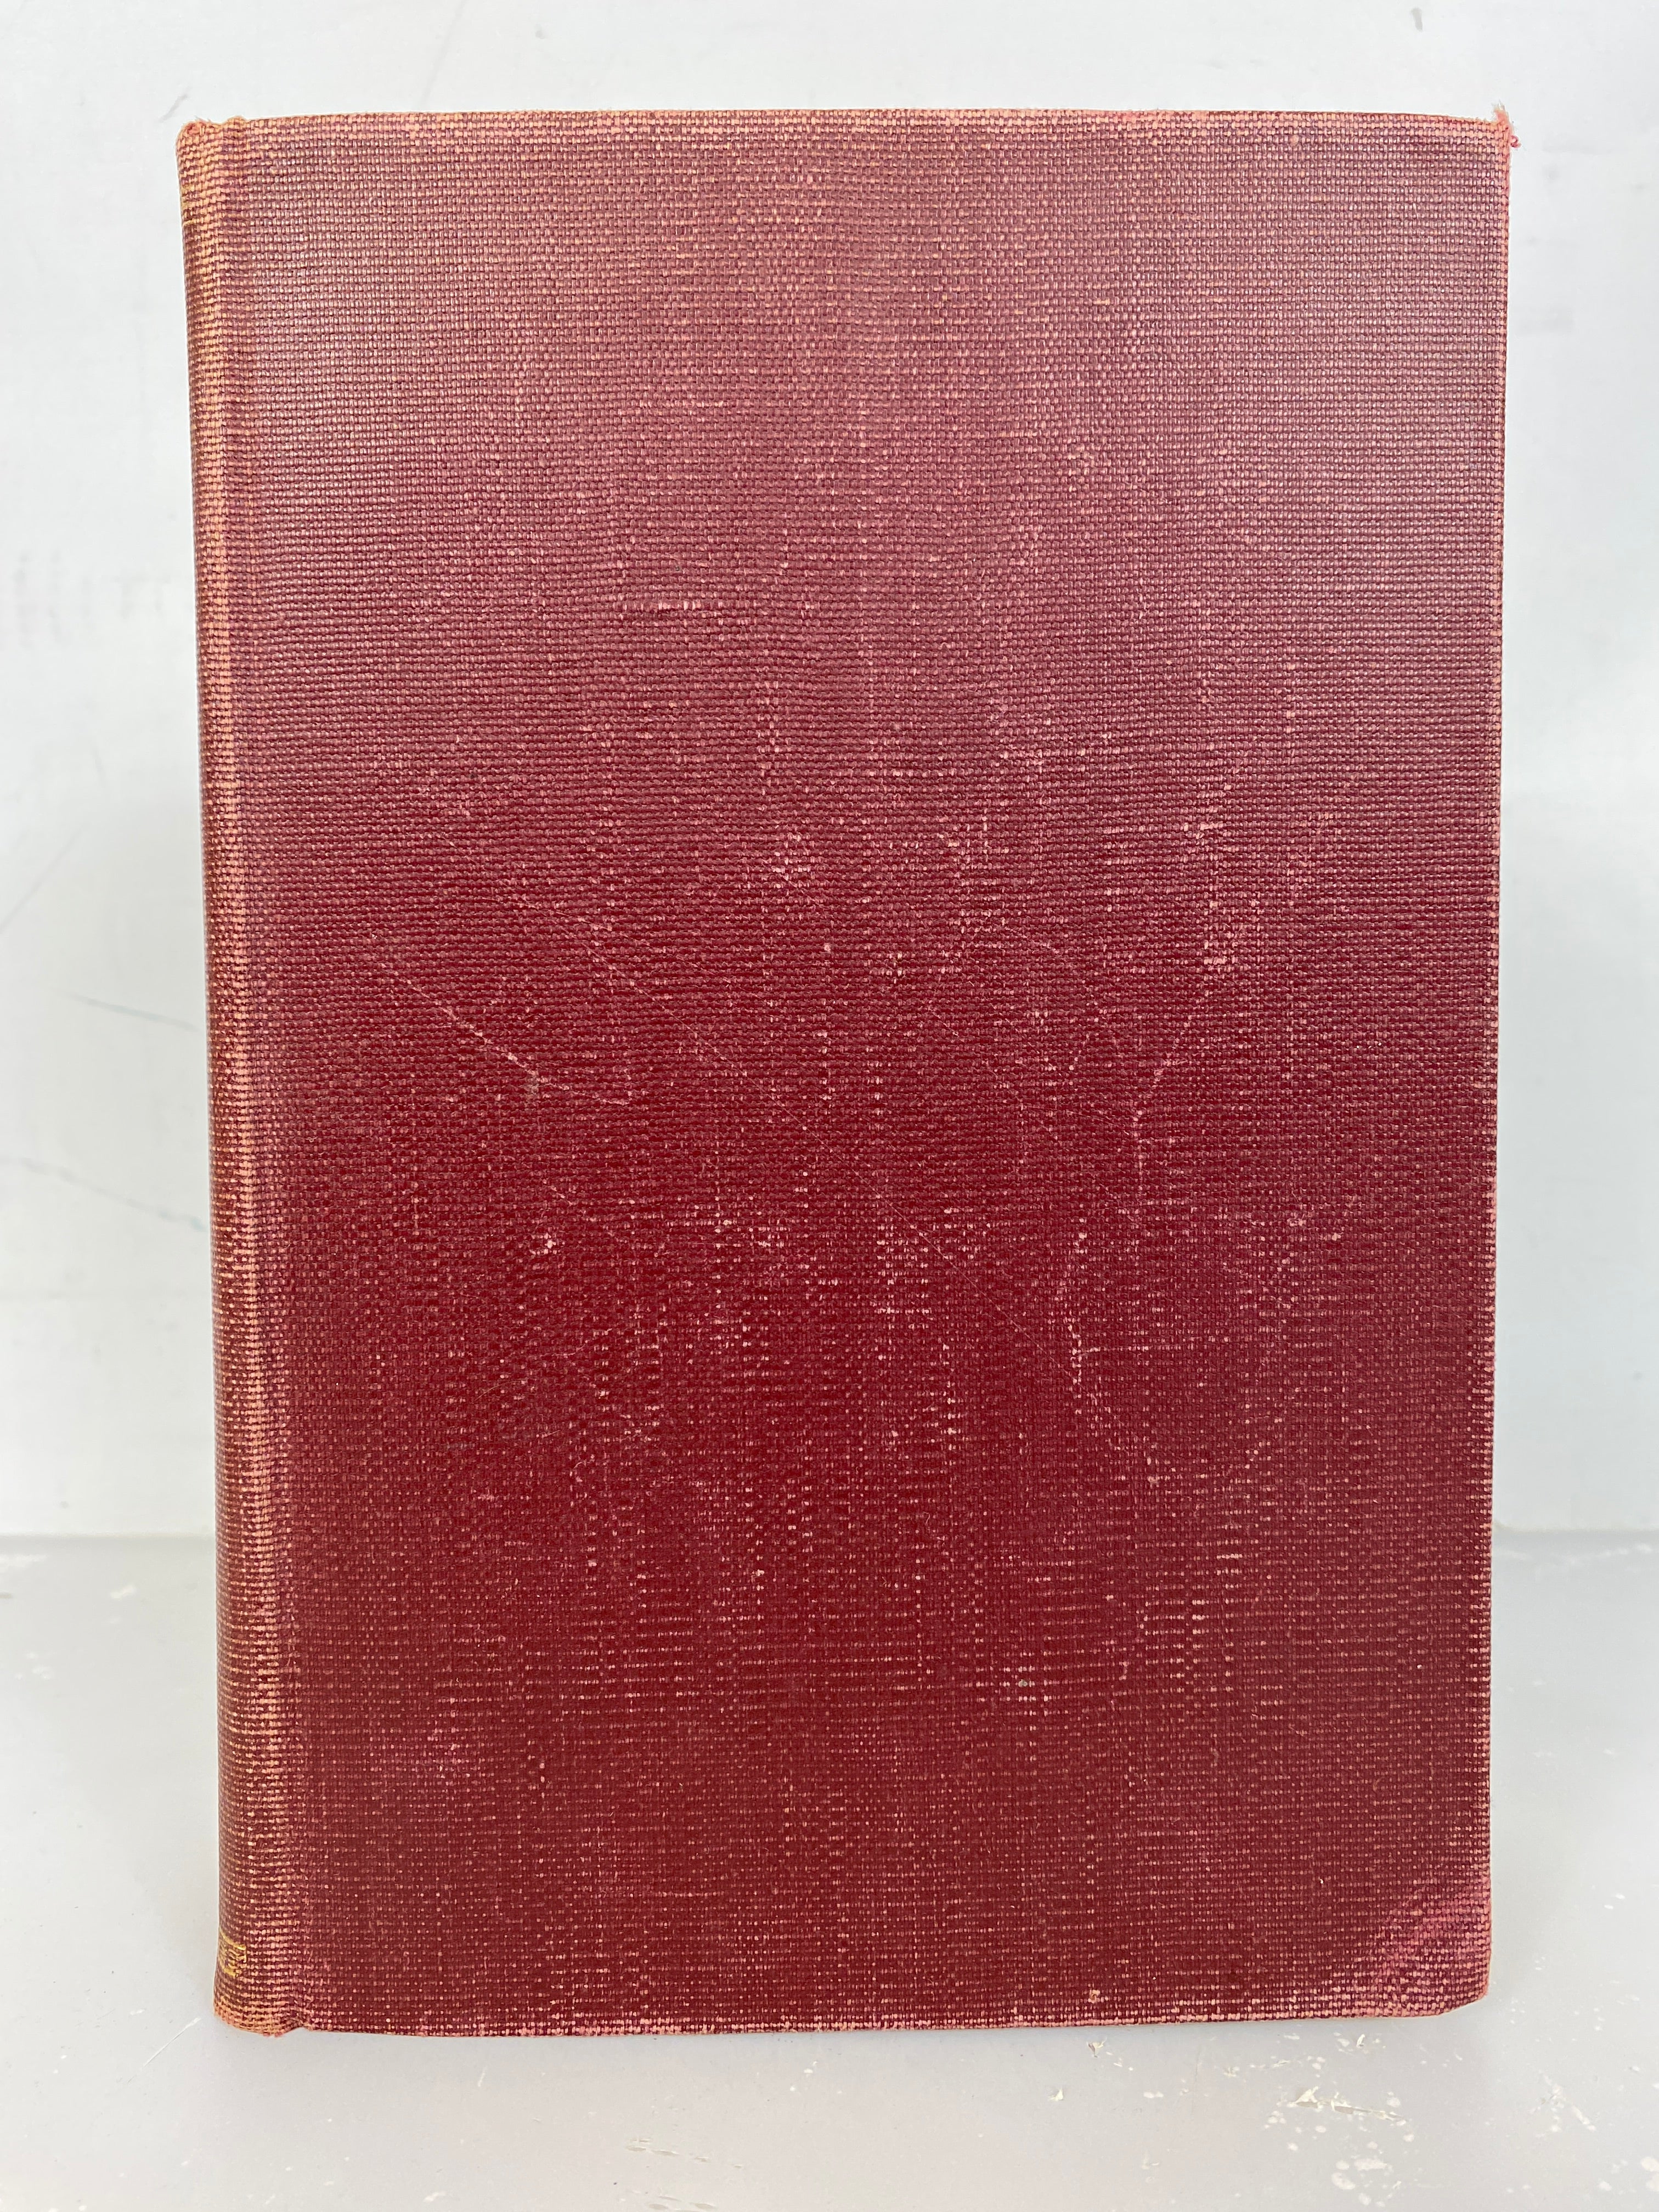 The Physiological Basis of Medical Practice by Best and Taylor Fourth Ed 1945 HC